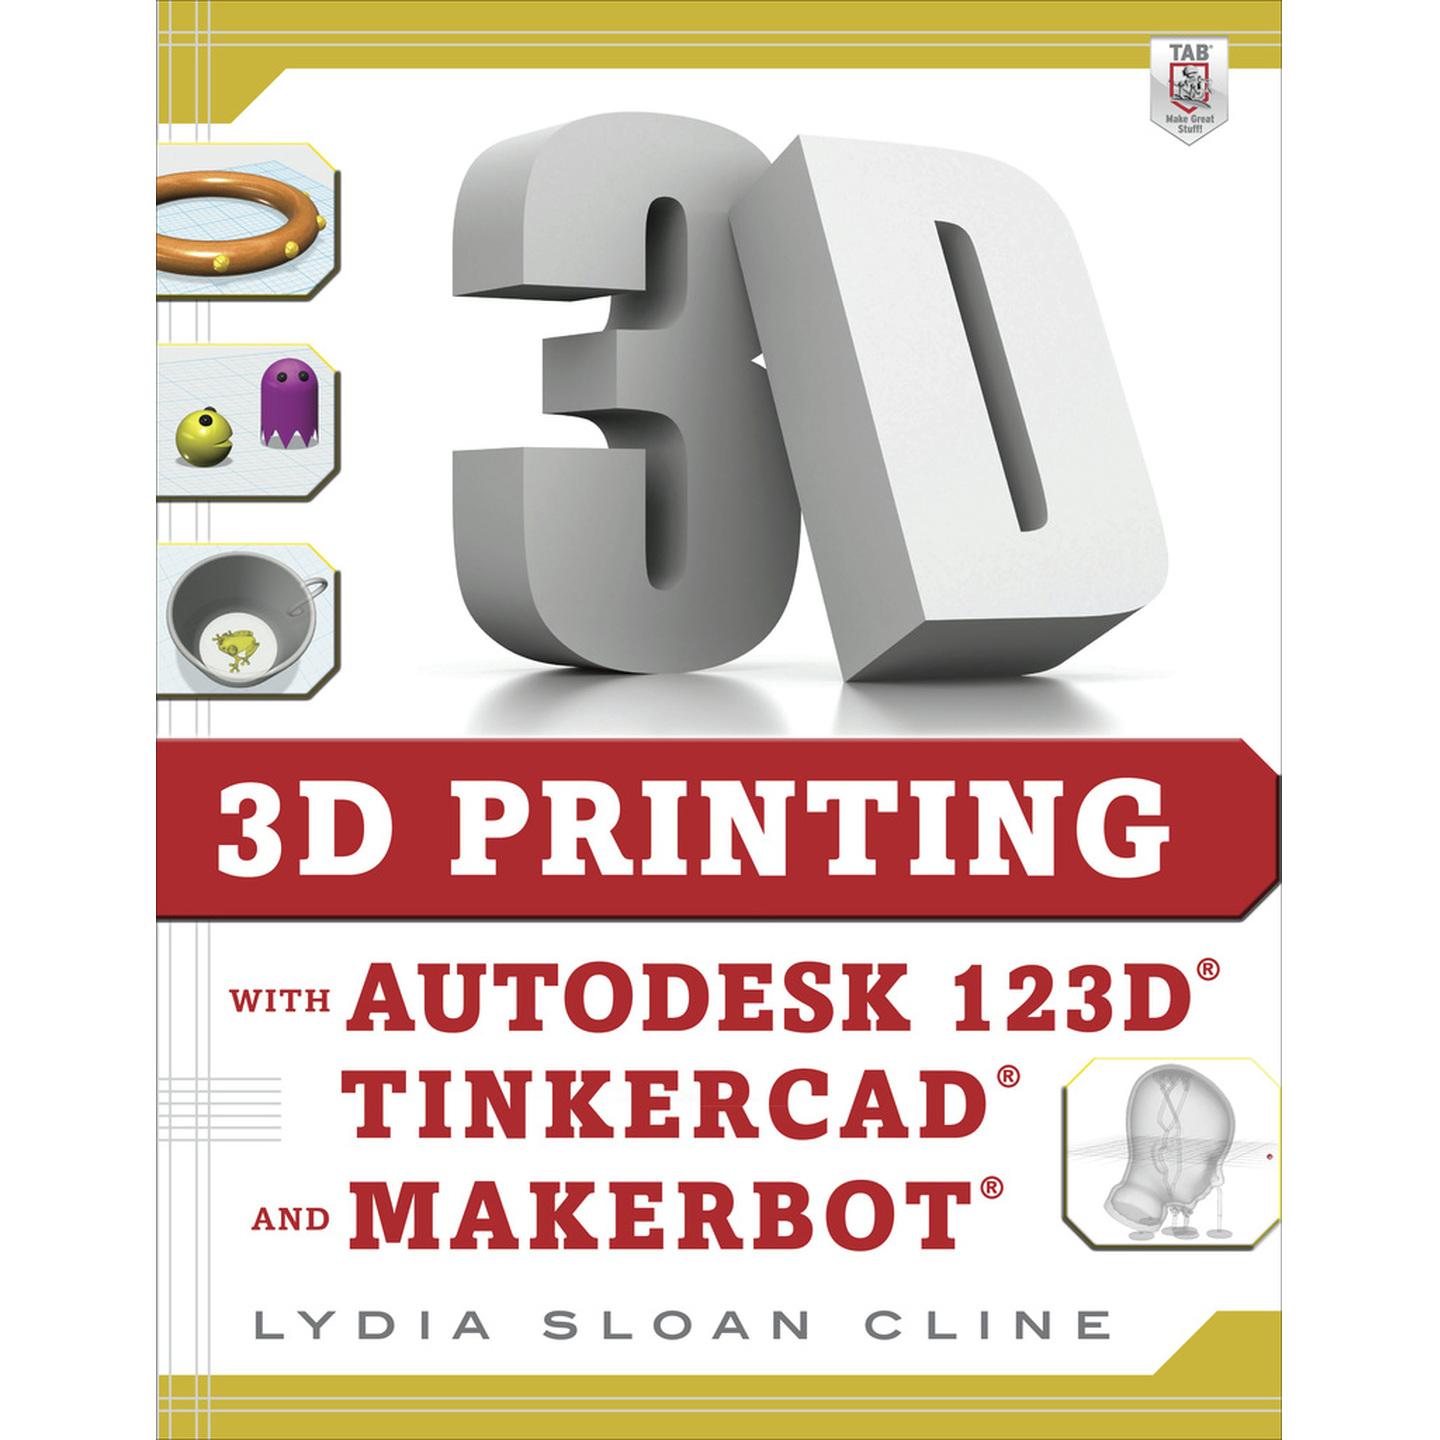 3D Printing with Autodesk 123D Tinkercad and Makerbot - Book